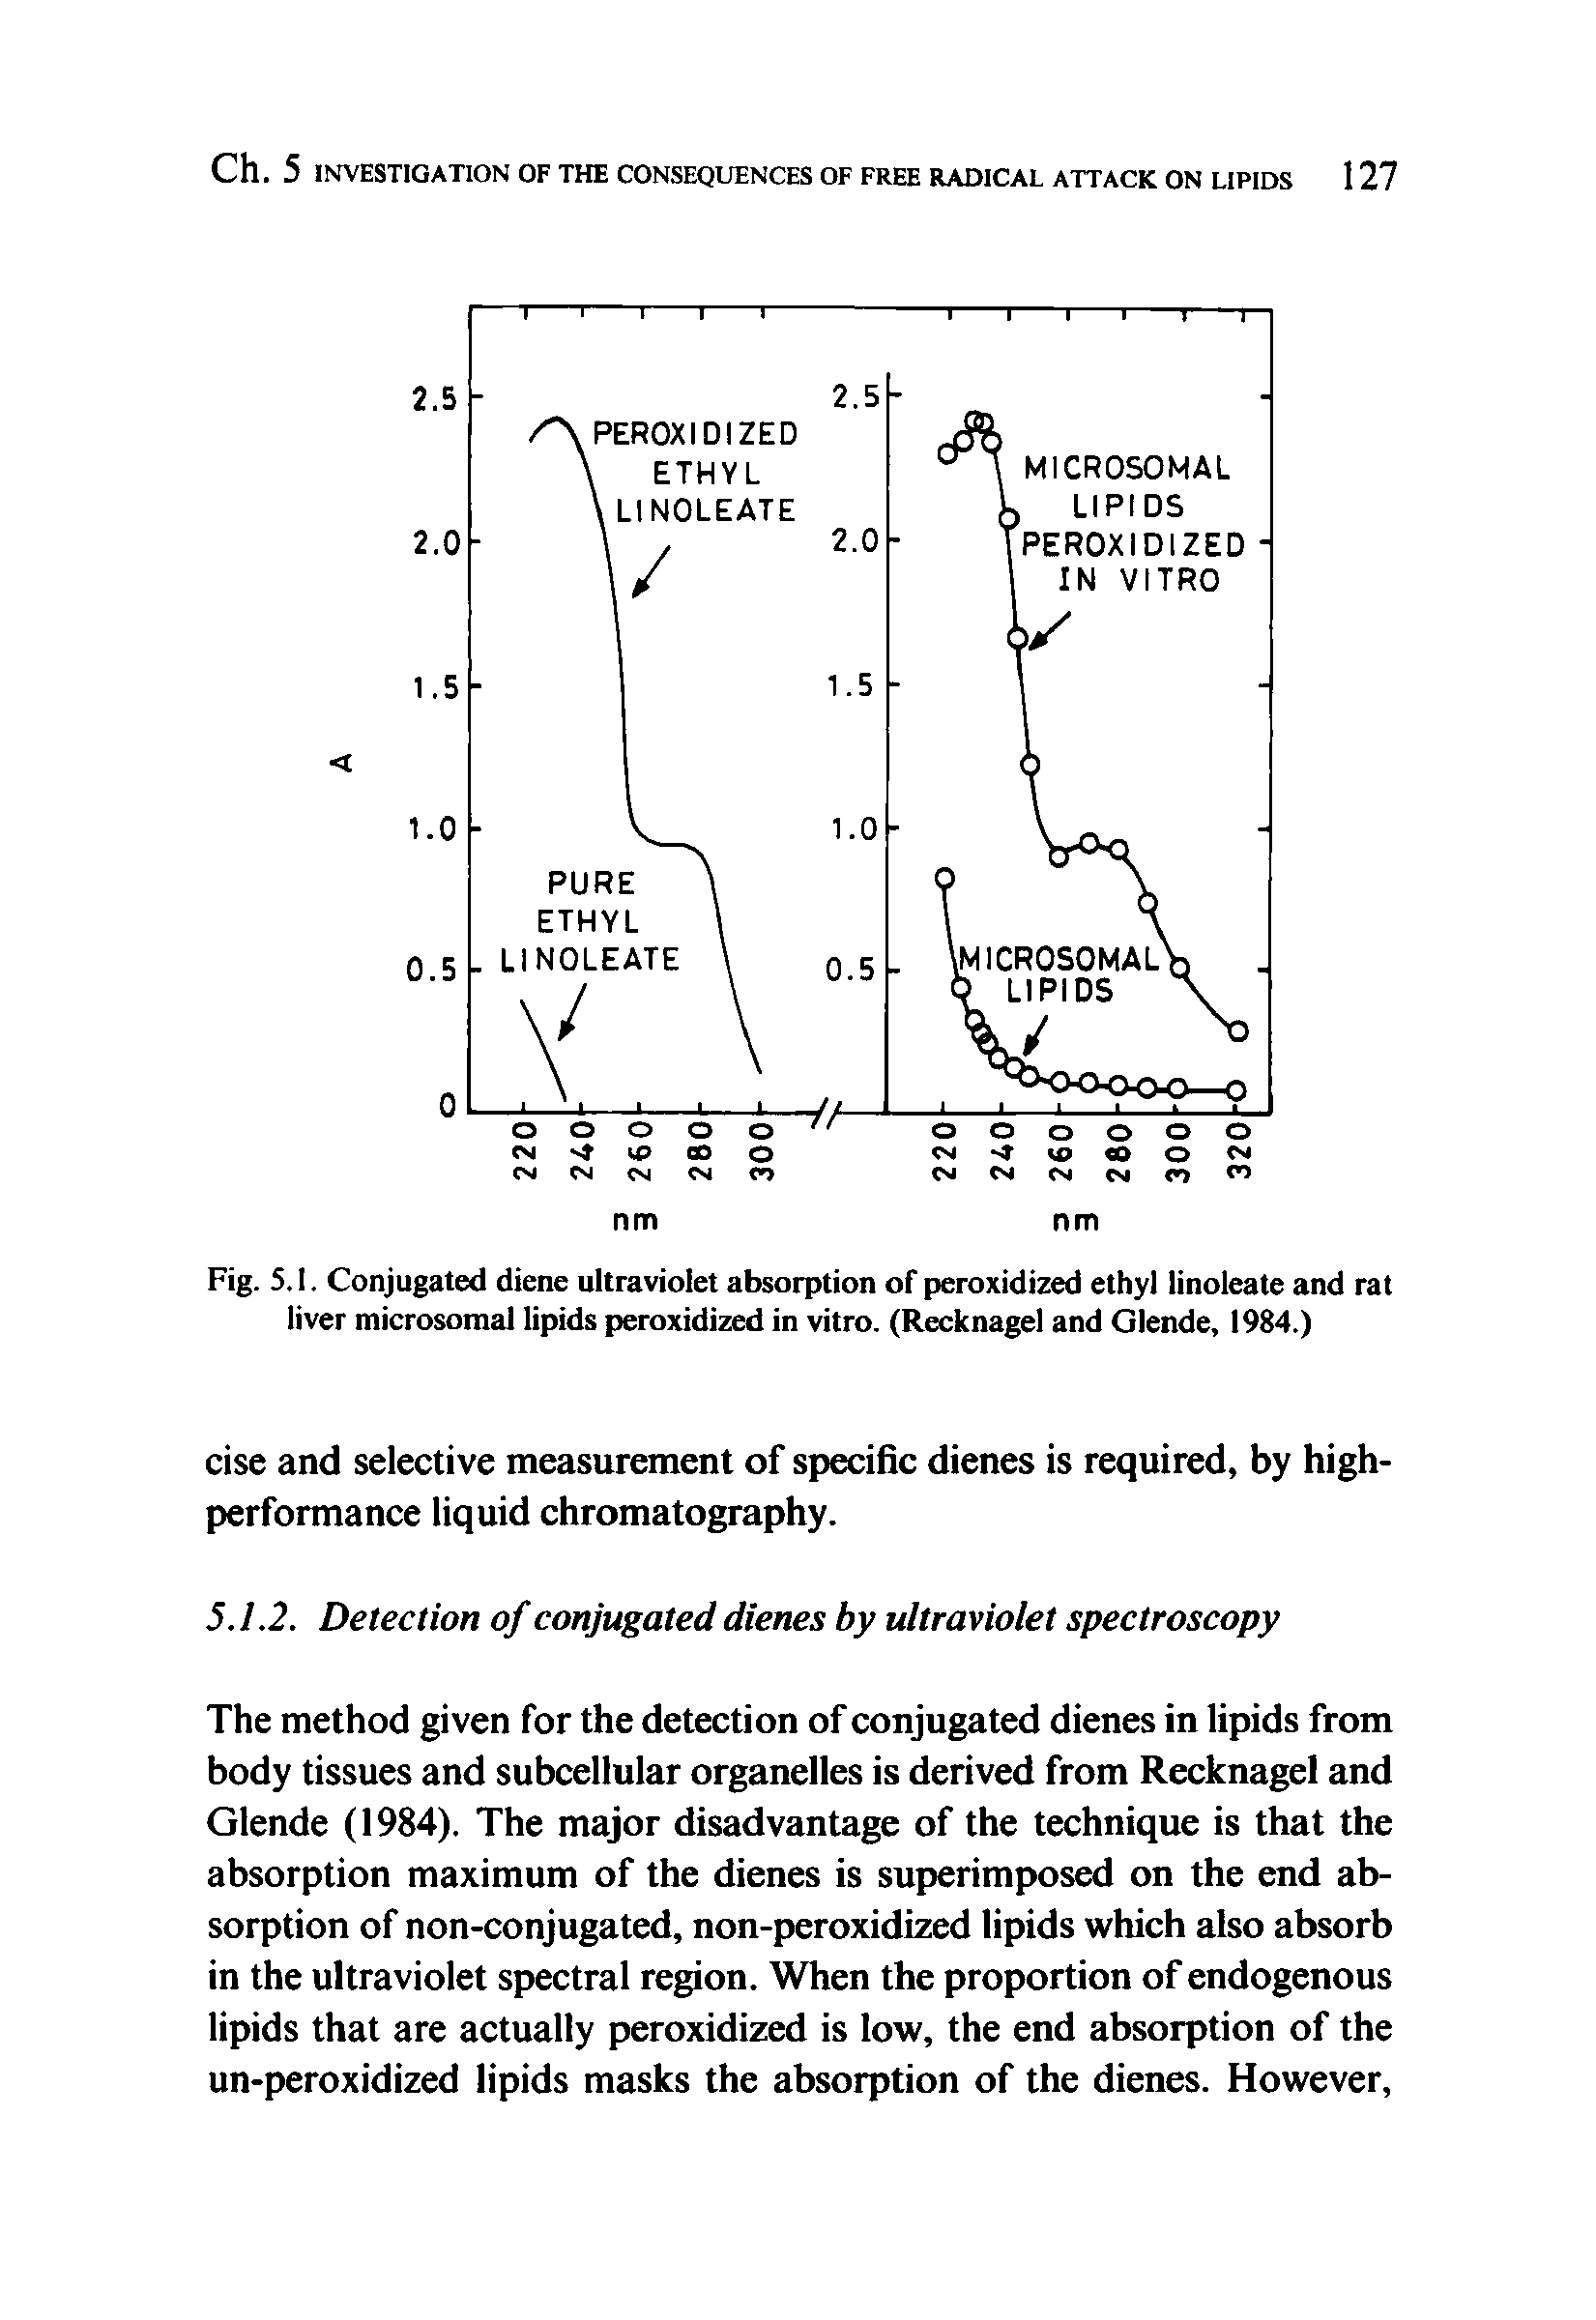 Fig. 5.1. Conjugated diene ultraviolet absorption of peroxidized ethyl linoleate and rat liver microsomal lipids peroxidized in vitro. (Recknagel and Glende, 1984.)...